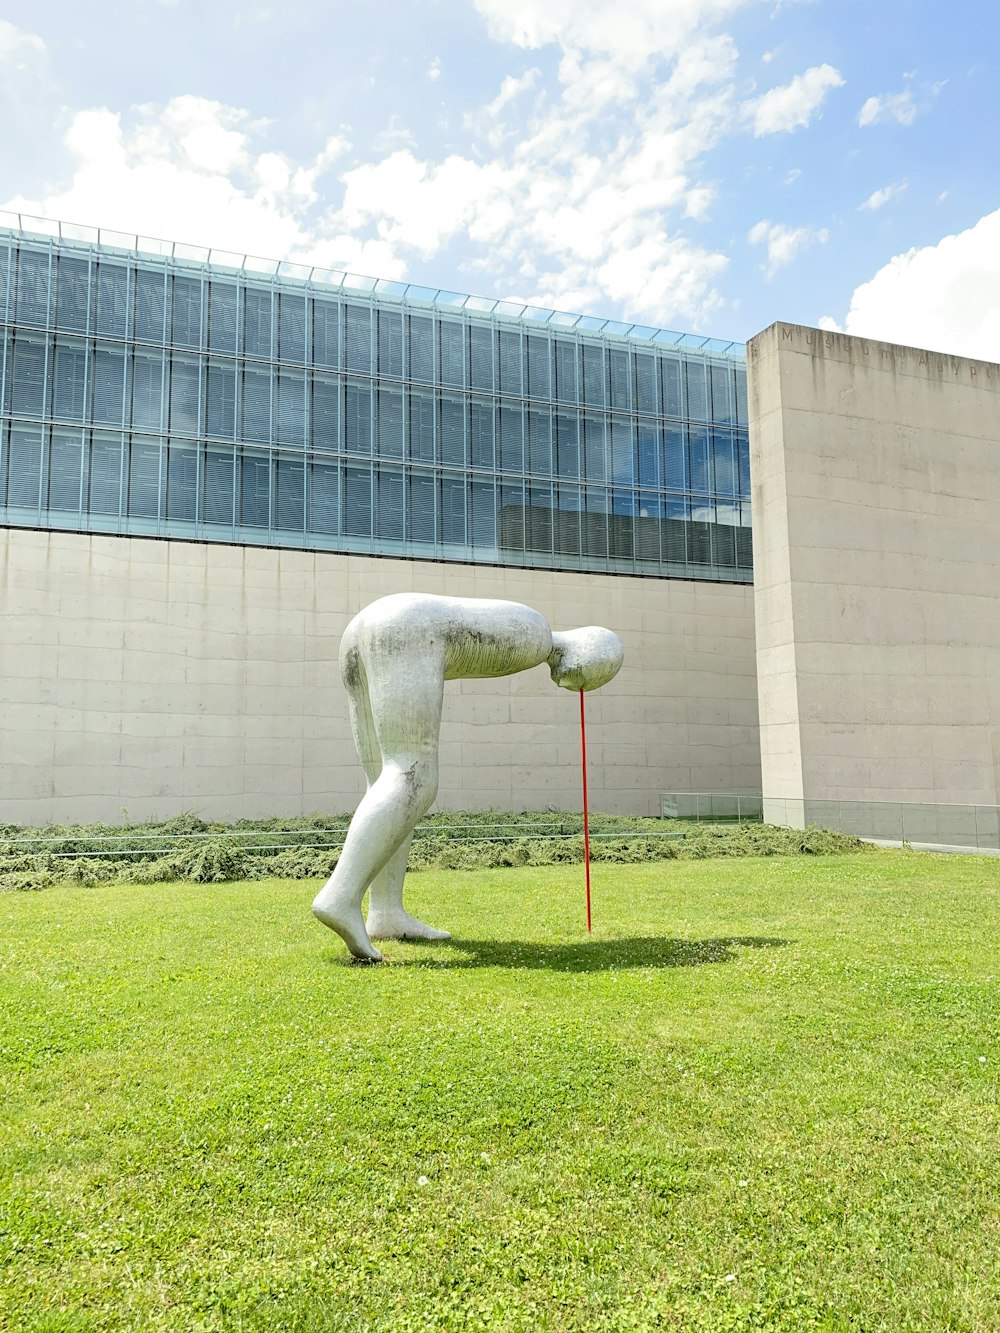 white statue on green grass field near building during daytime